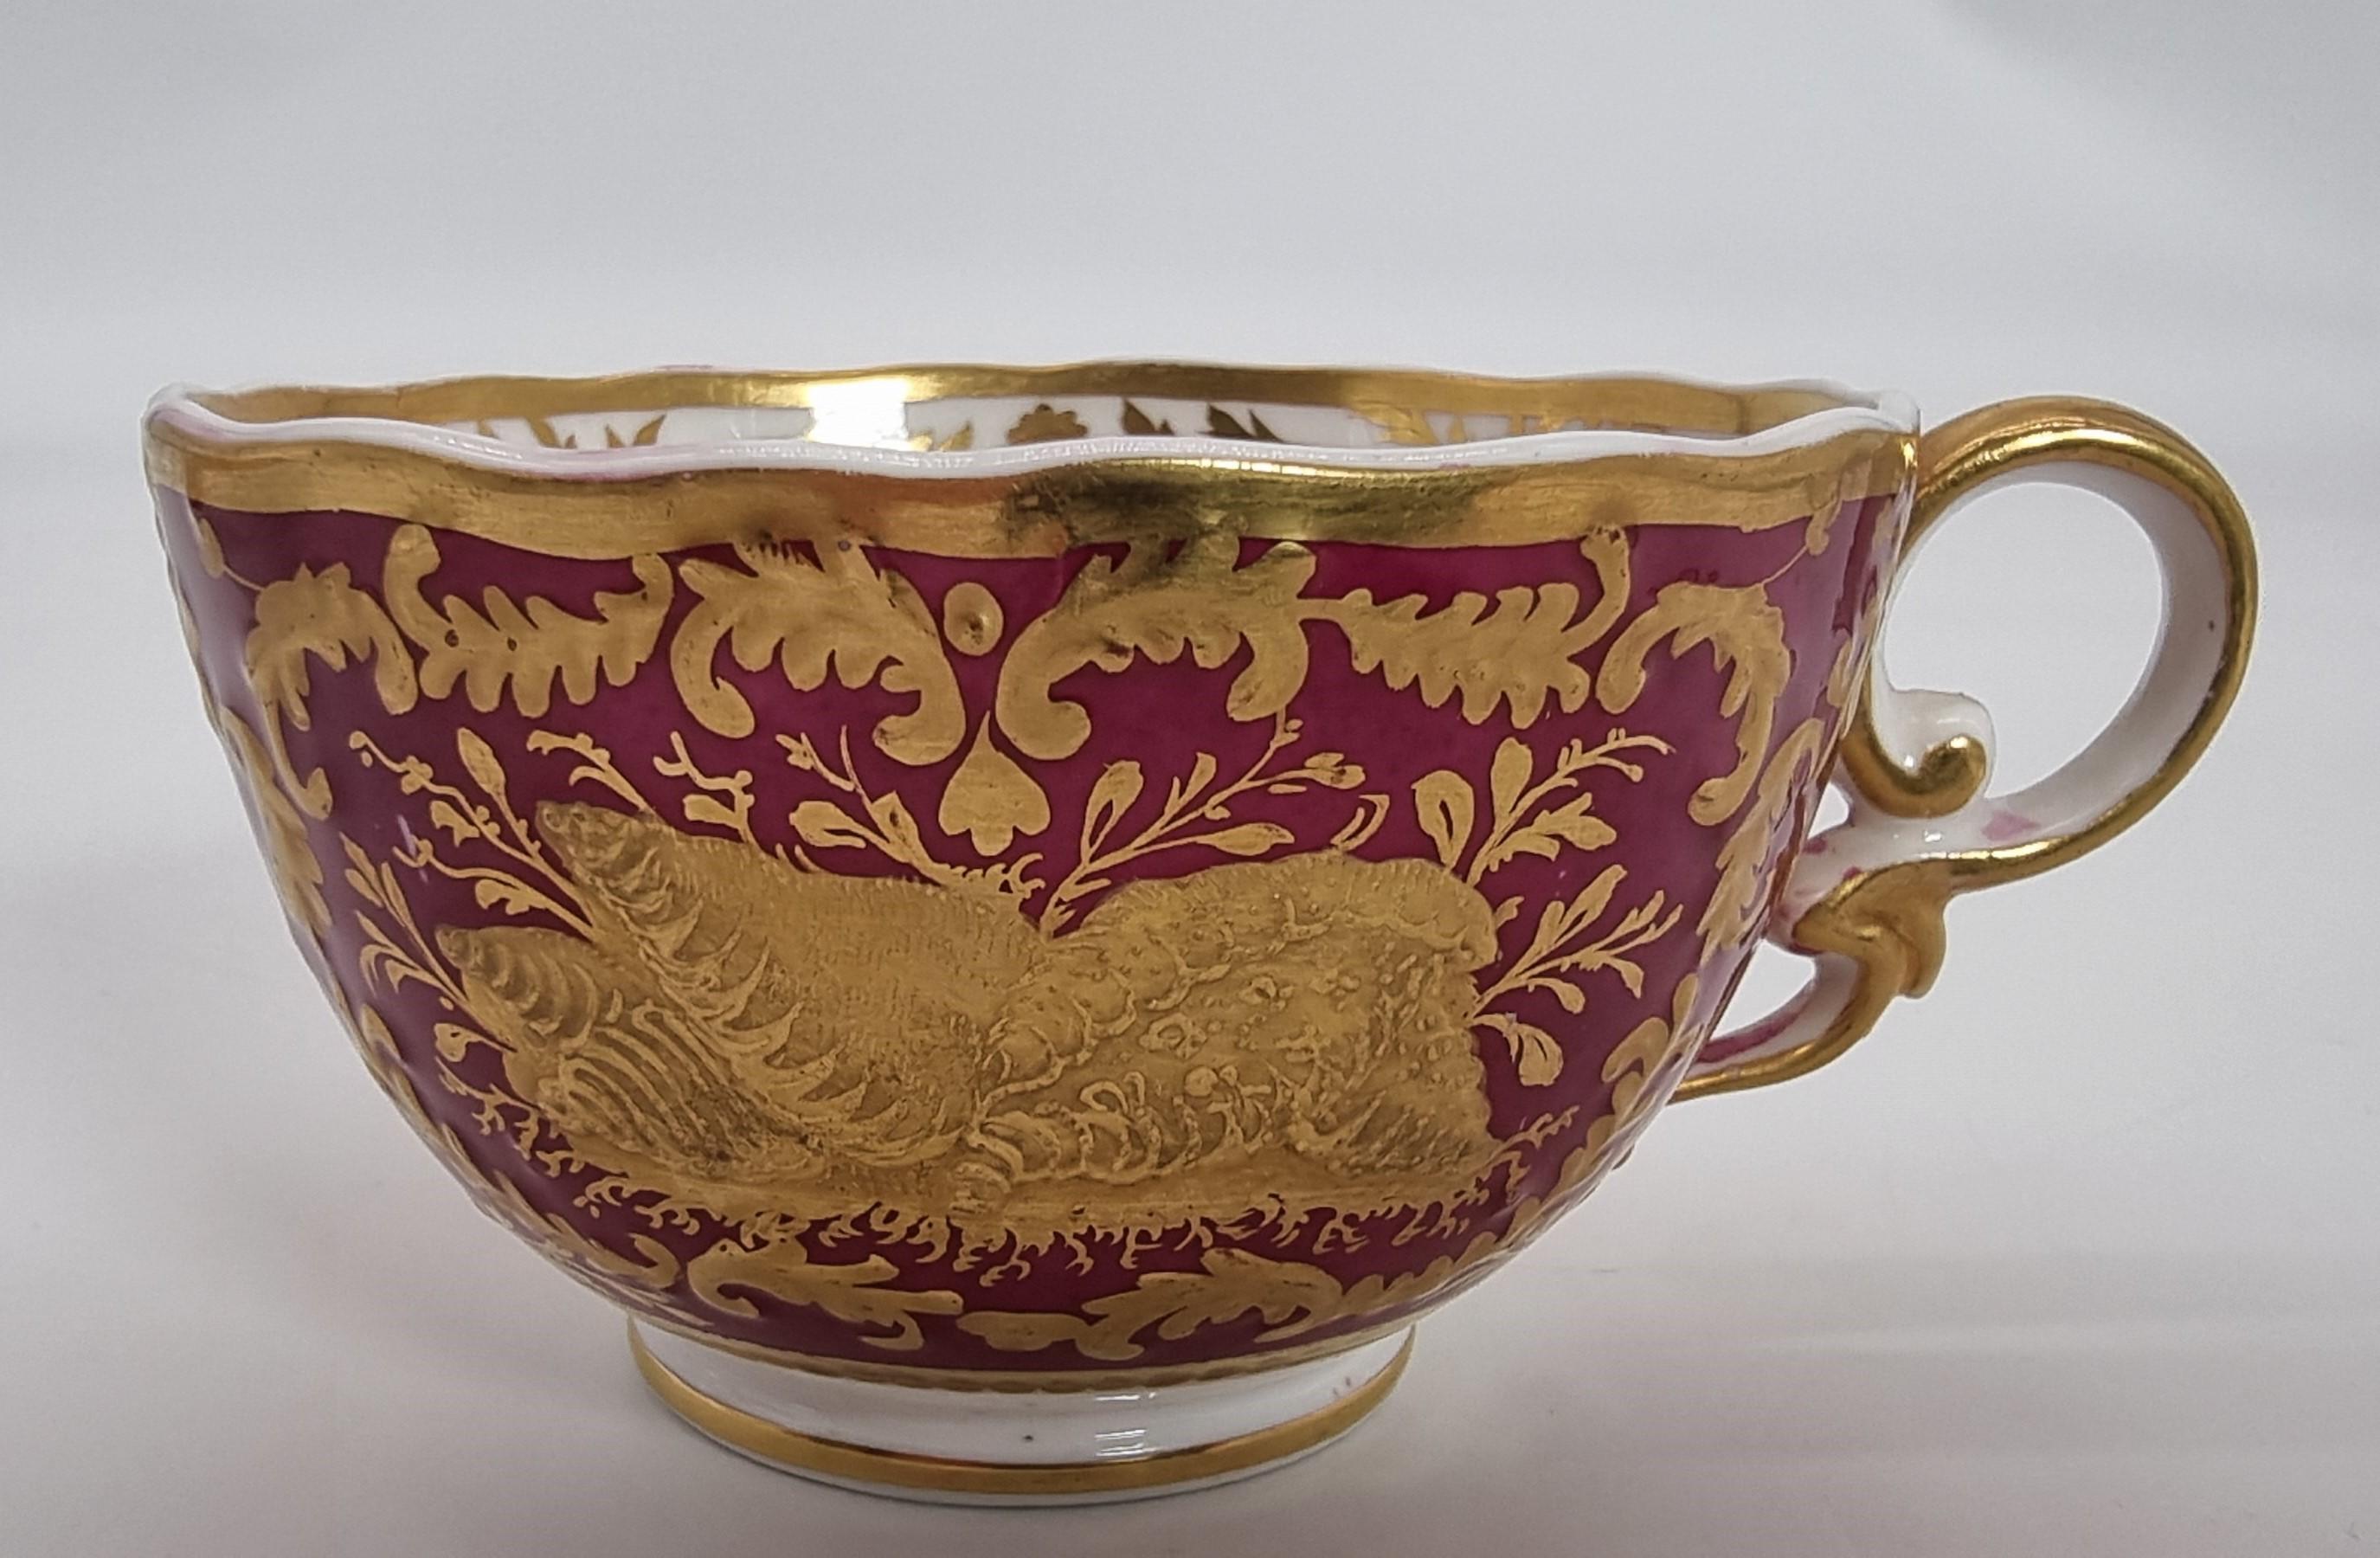 An exquisite and rare early 19th century Spode cabinet cup and saucer circa 1830 For Sale 4